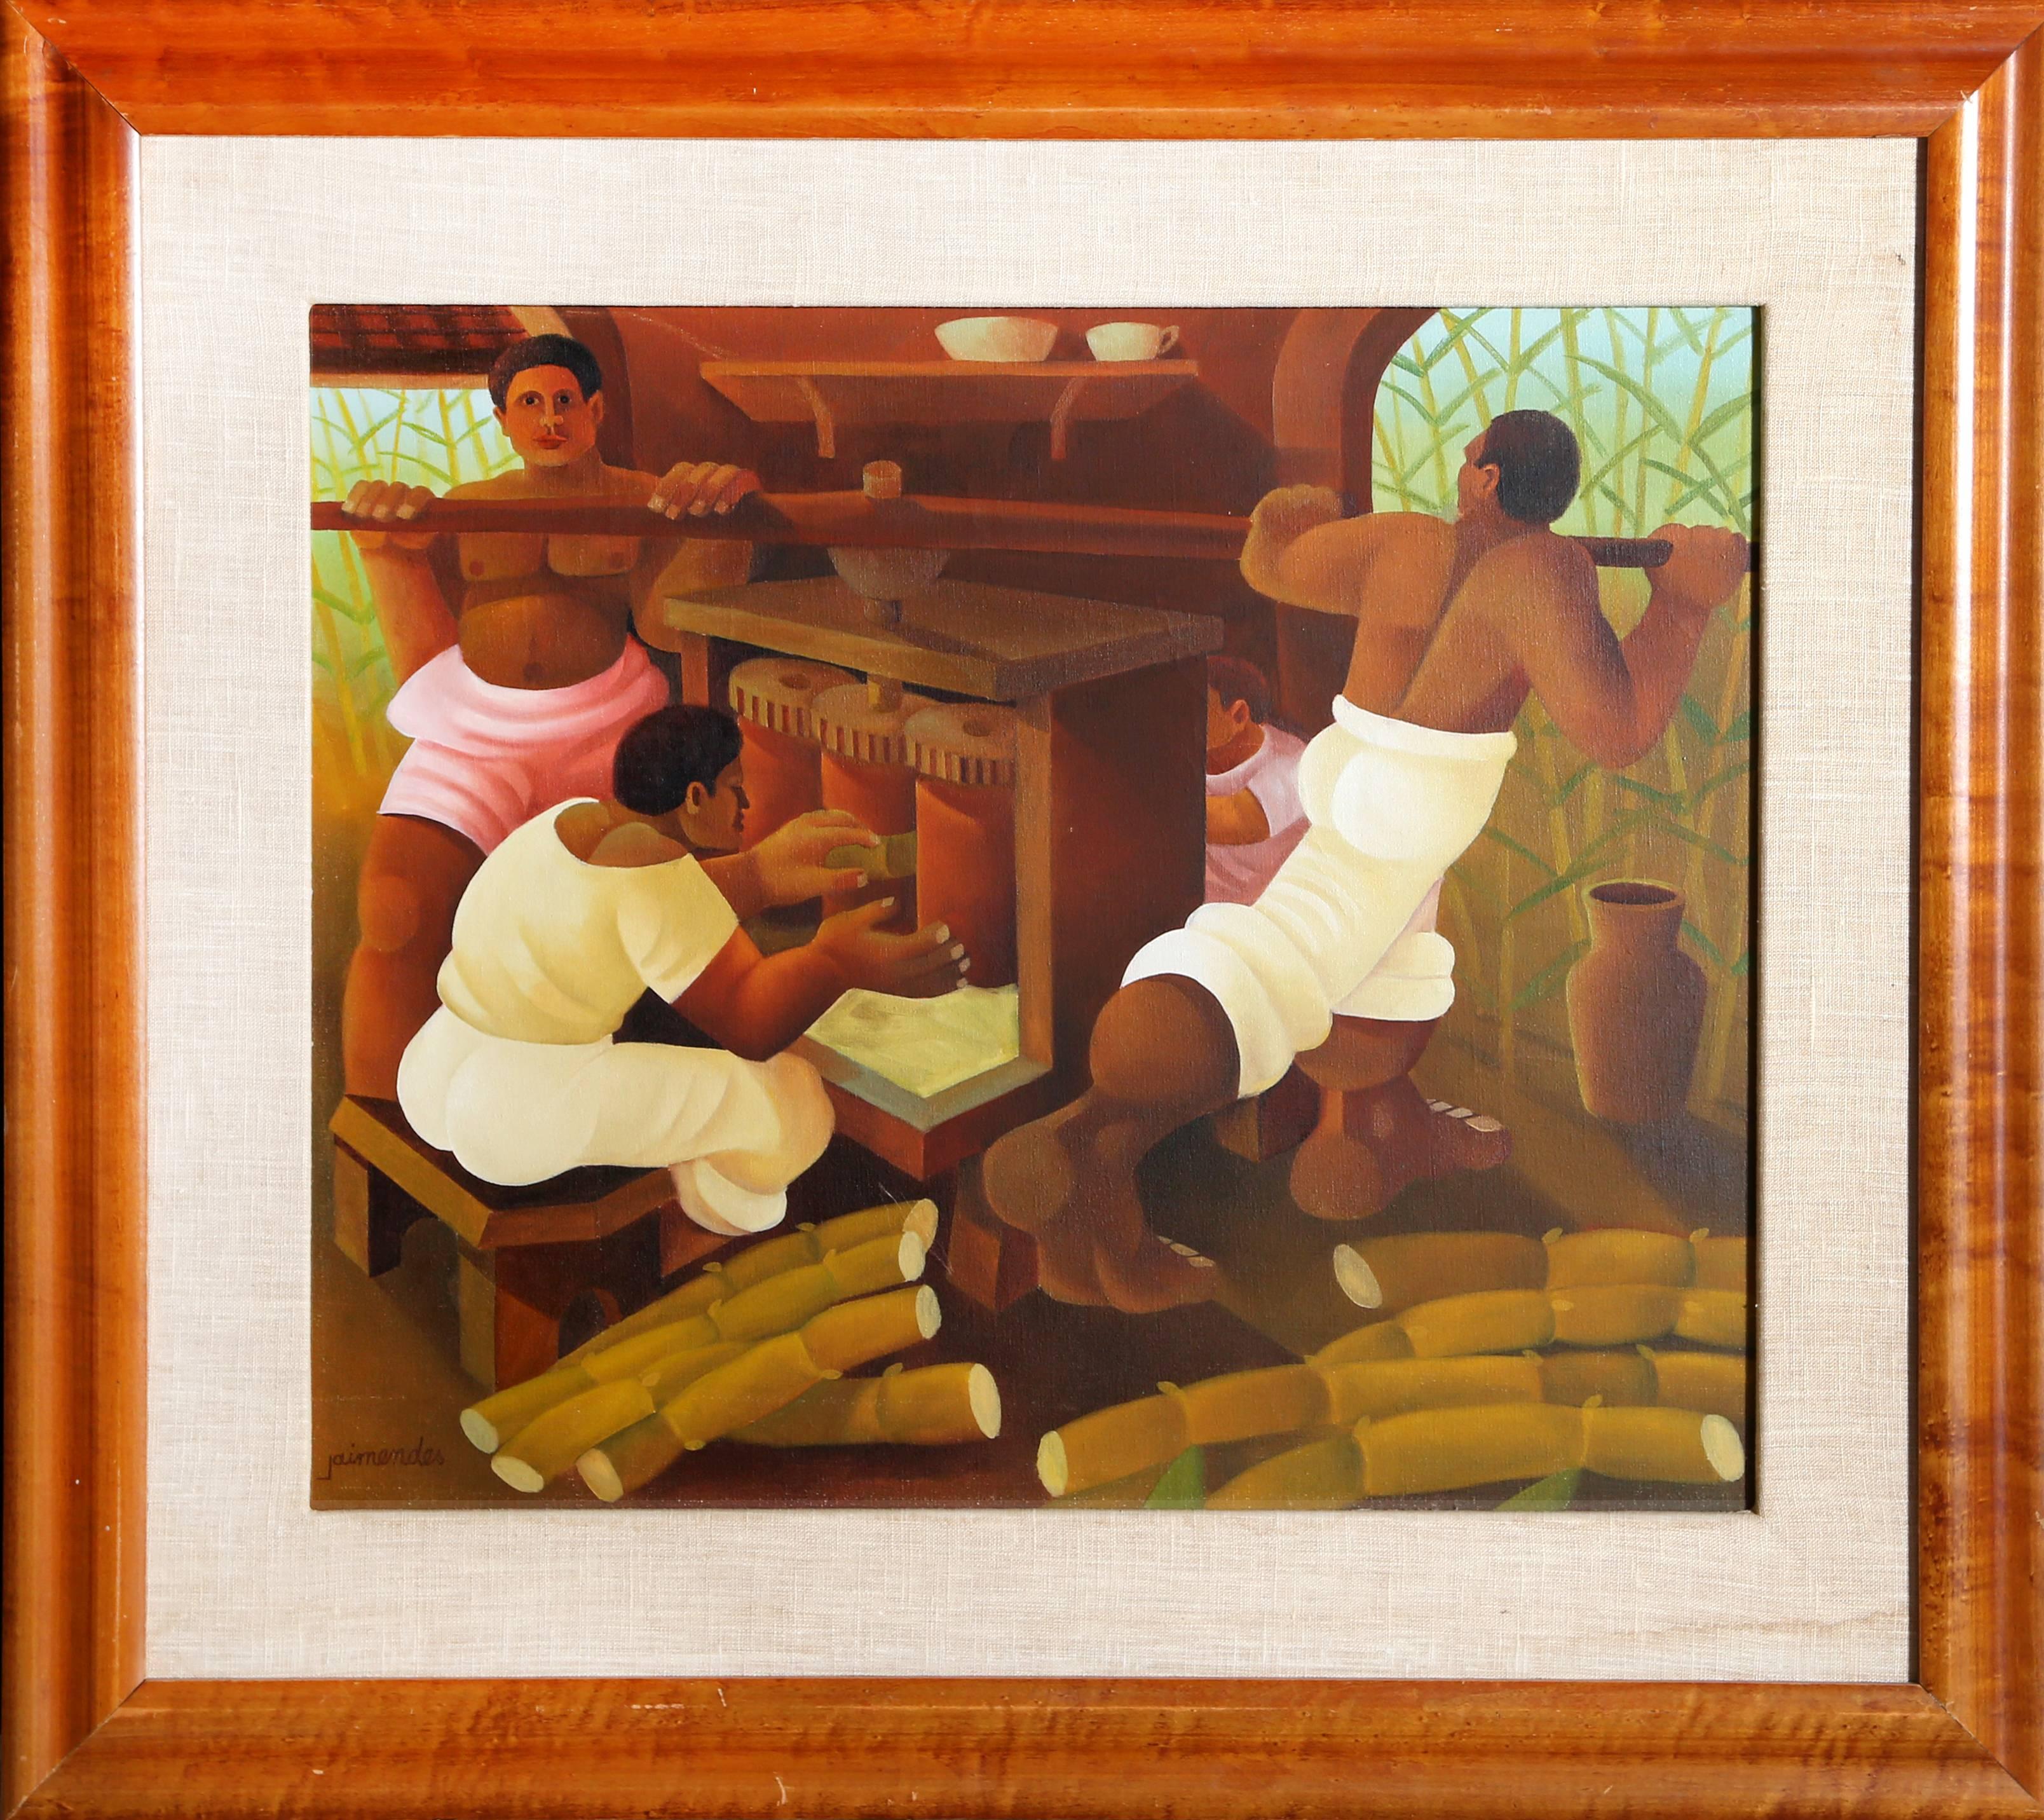 Grinding Sugar Cane, Painting by Jaimendes